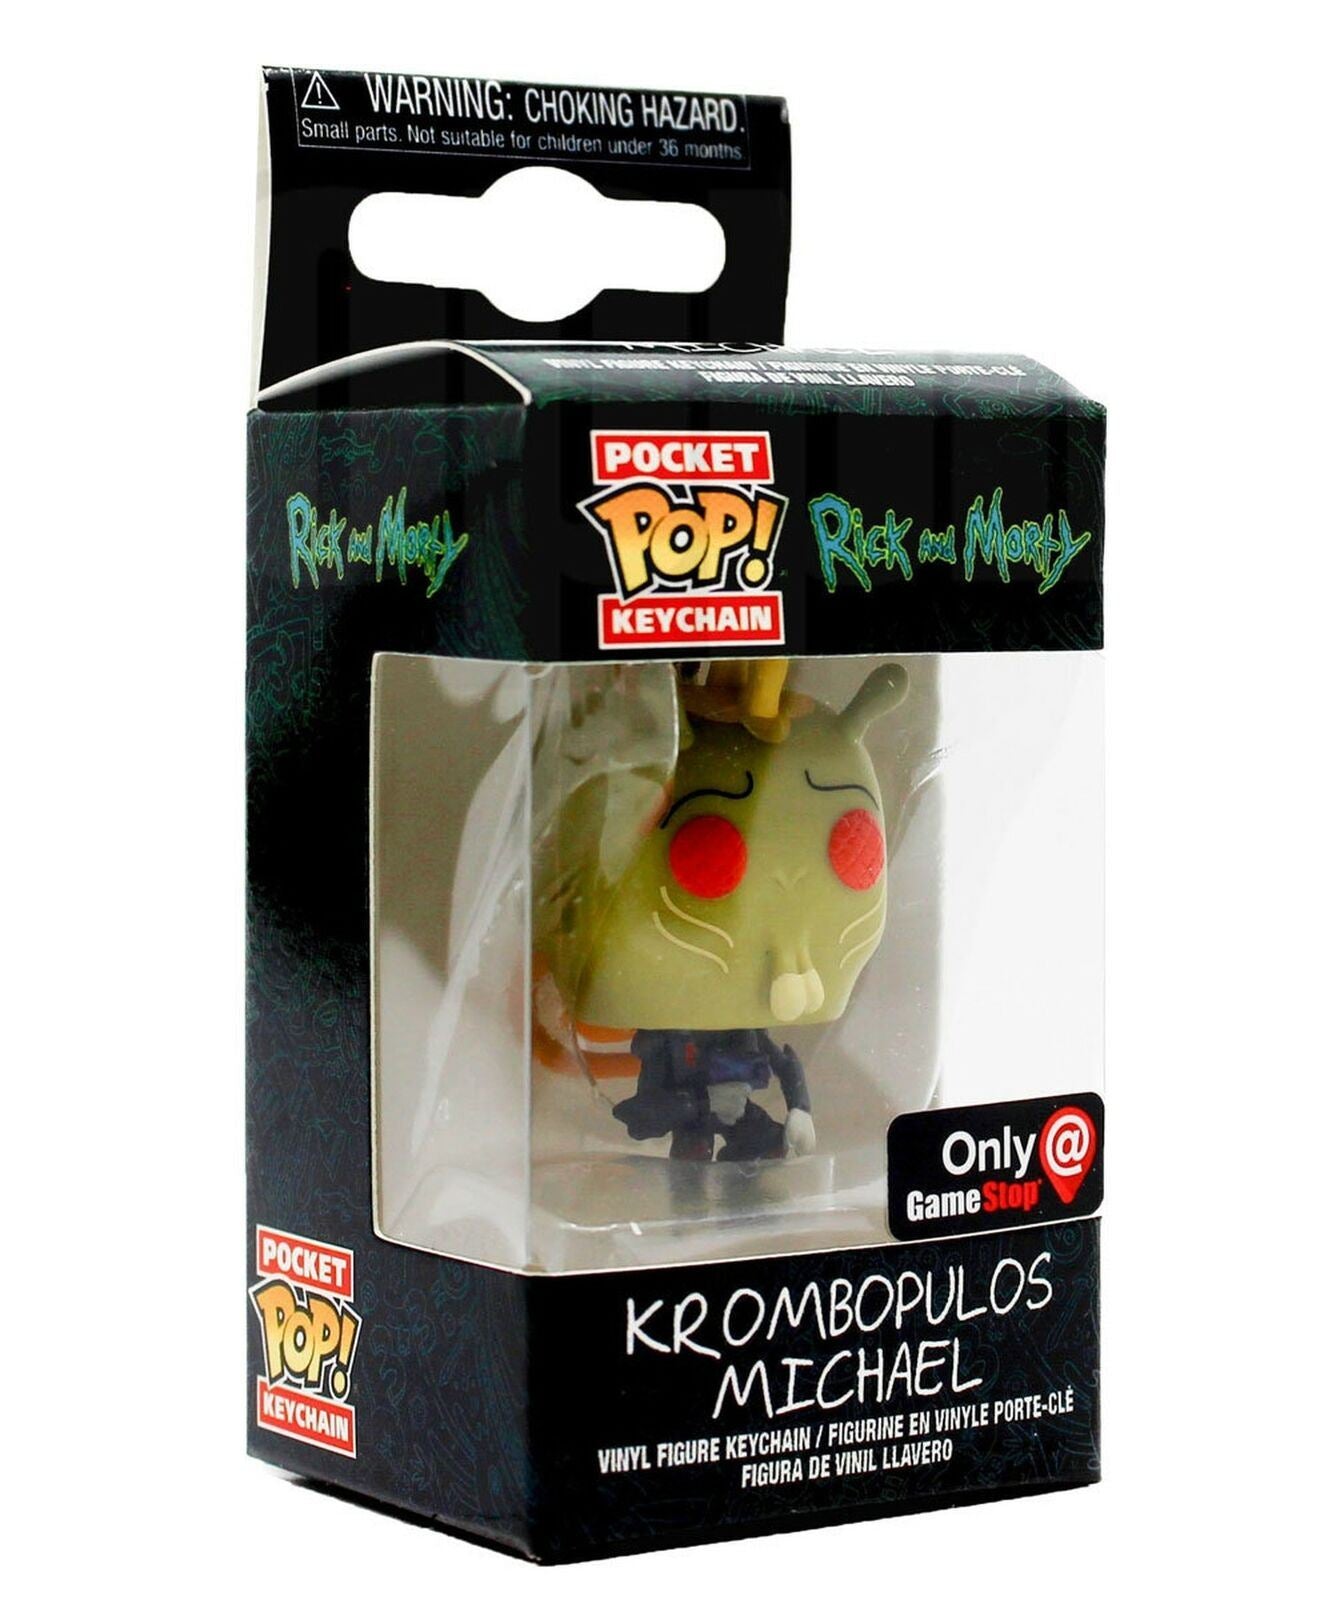 Funko KROMBOPULOS MICHAEL Pocket POP Rick and Morty EXCLUSIVE Keychain Figure